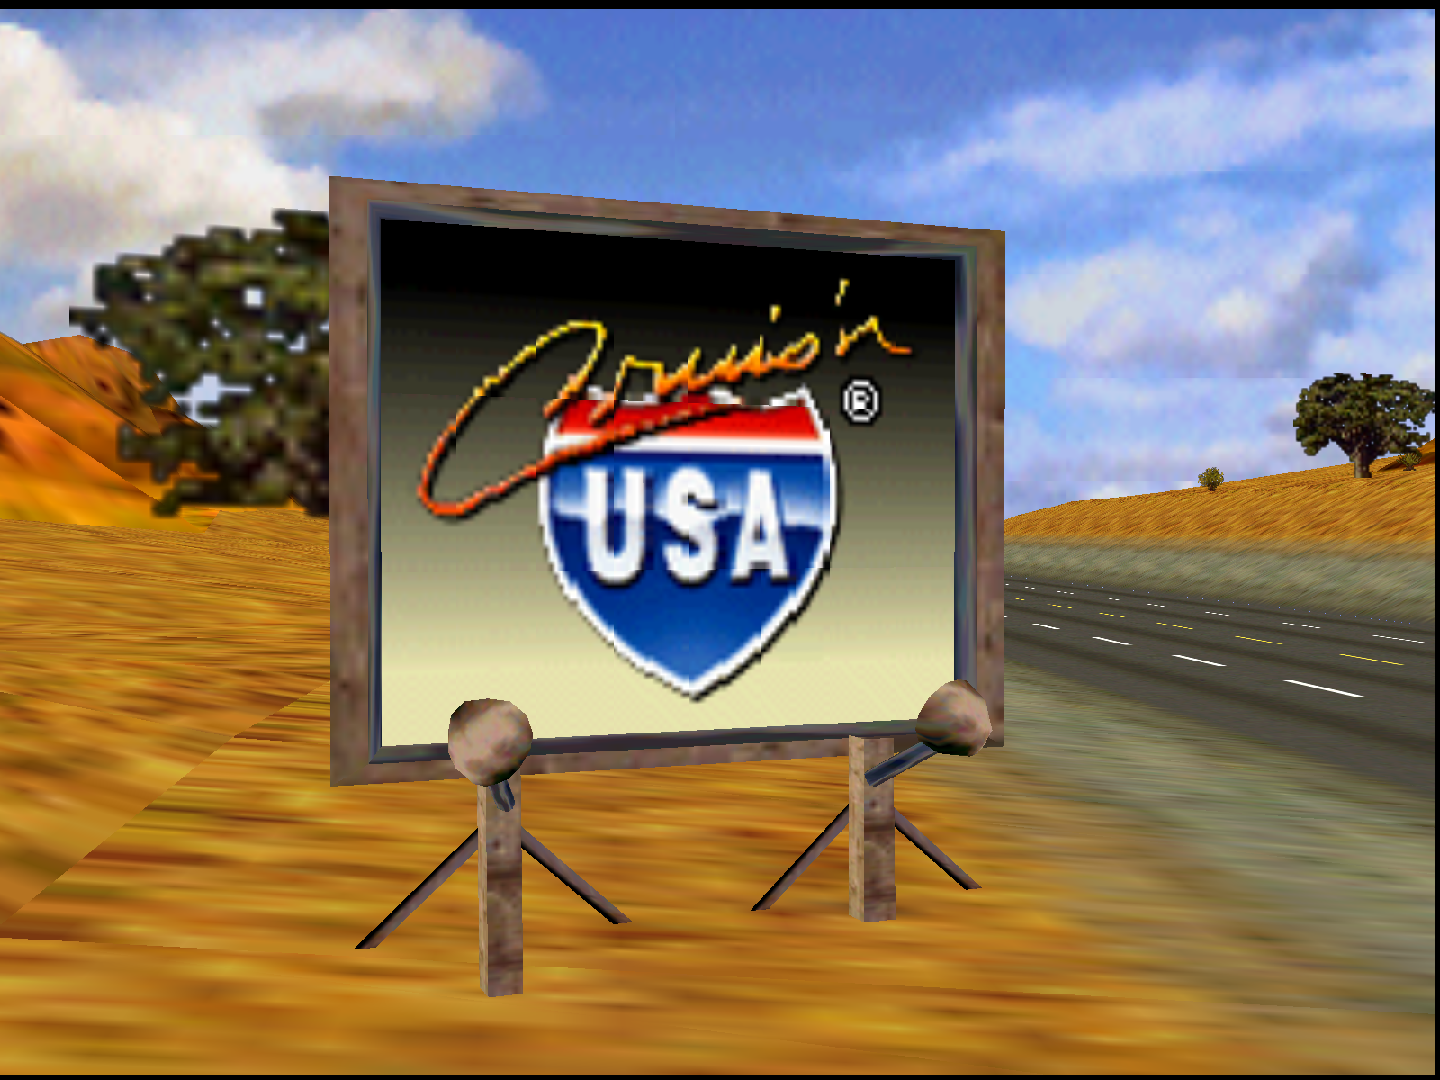 Cruis'n USA - Authentic Nintendo 64 (N64) Game Cartridge - YourGamingShop.com - Buy, Sell, Trade Video Games Online. 120 Day Warranty. Satisfaction Guaranteed.